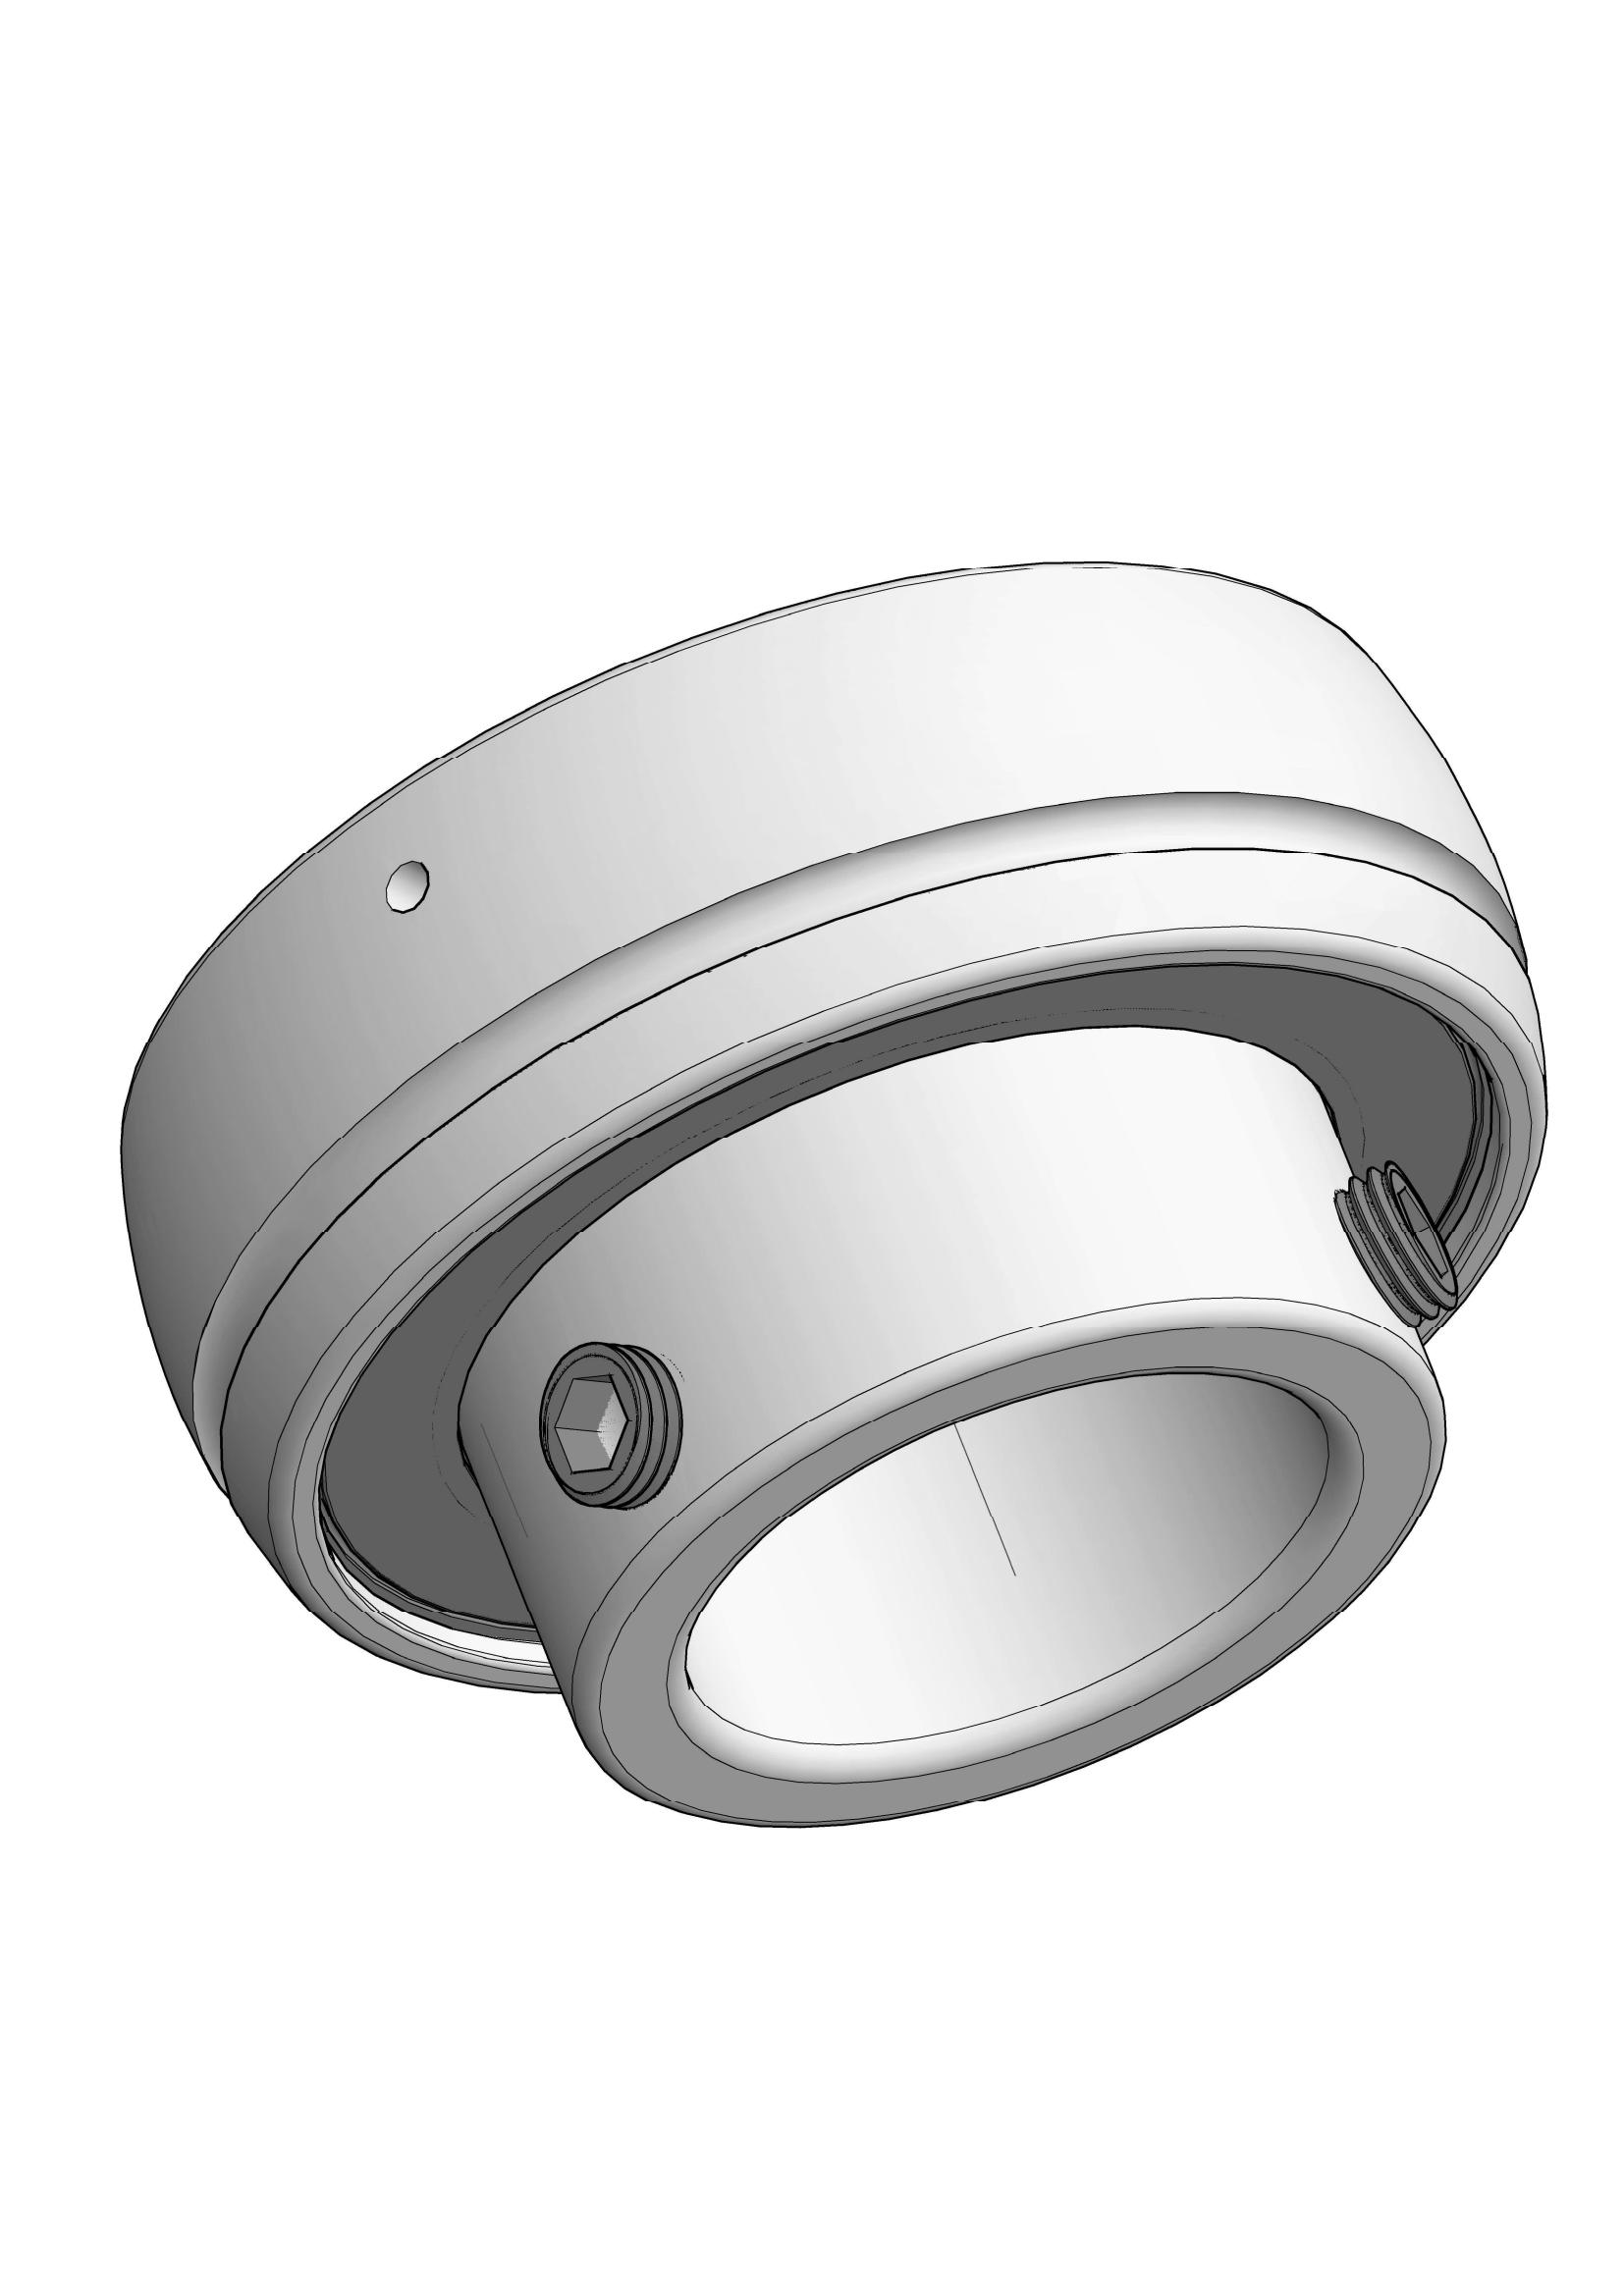 SB207 insert ball bearings with Eccentric Collar Lock with 35mm Bore